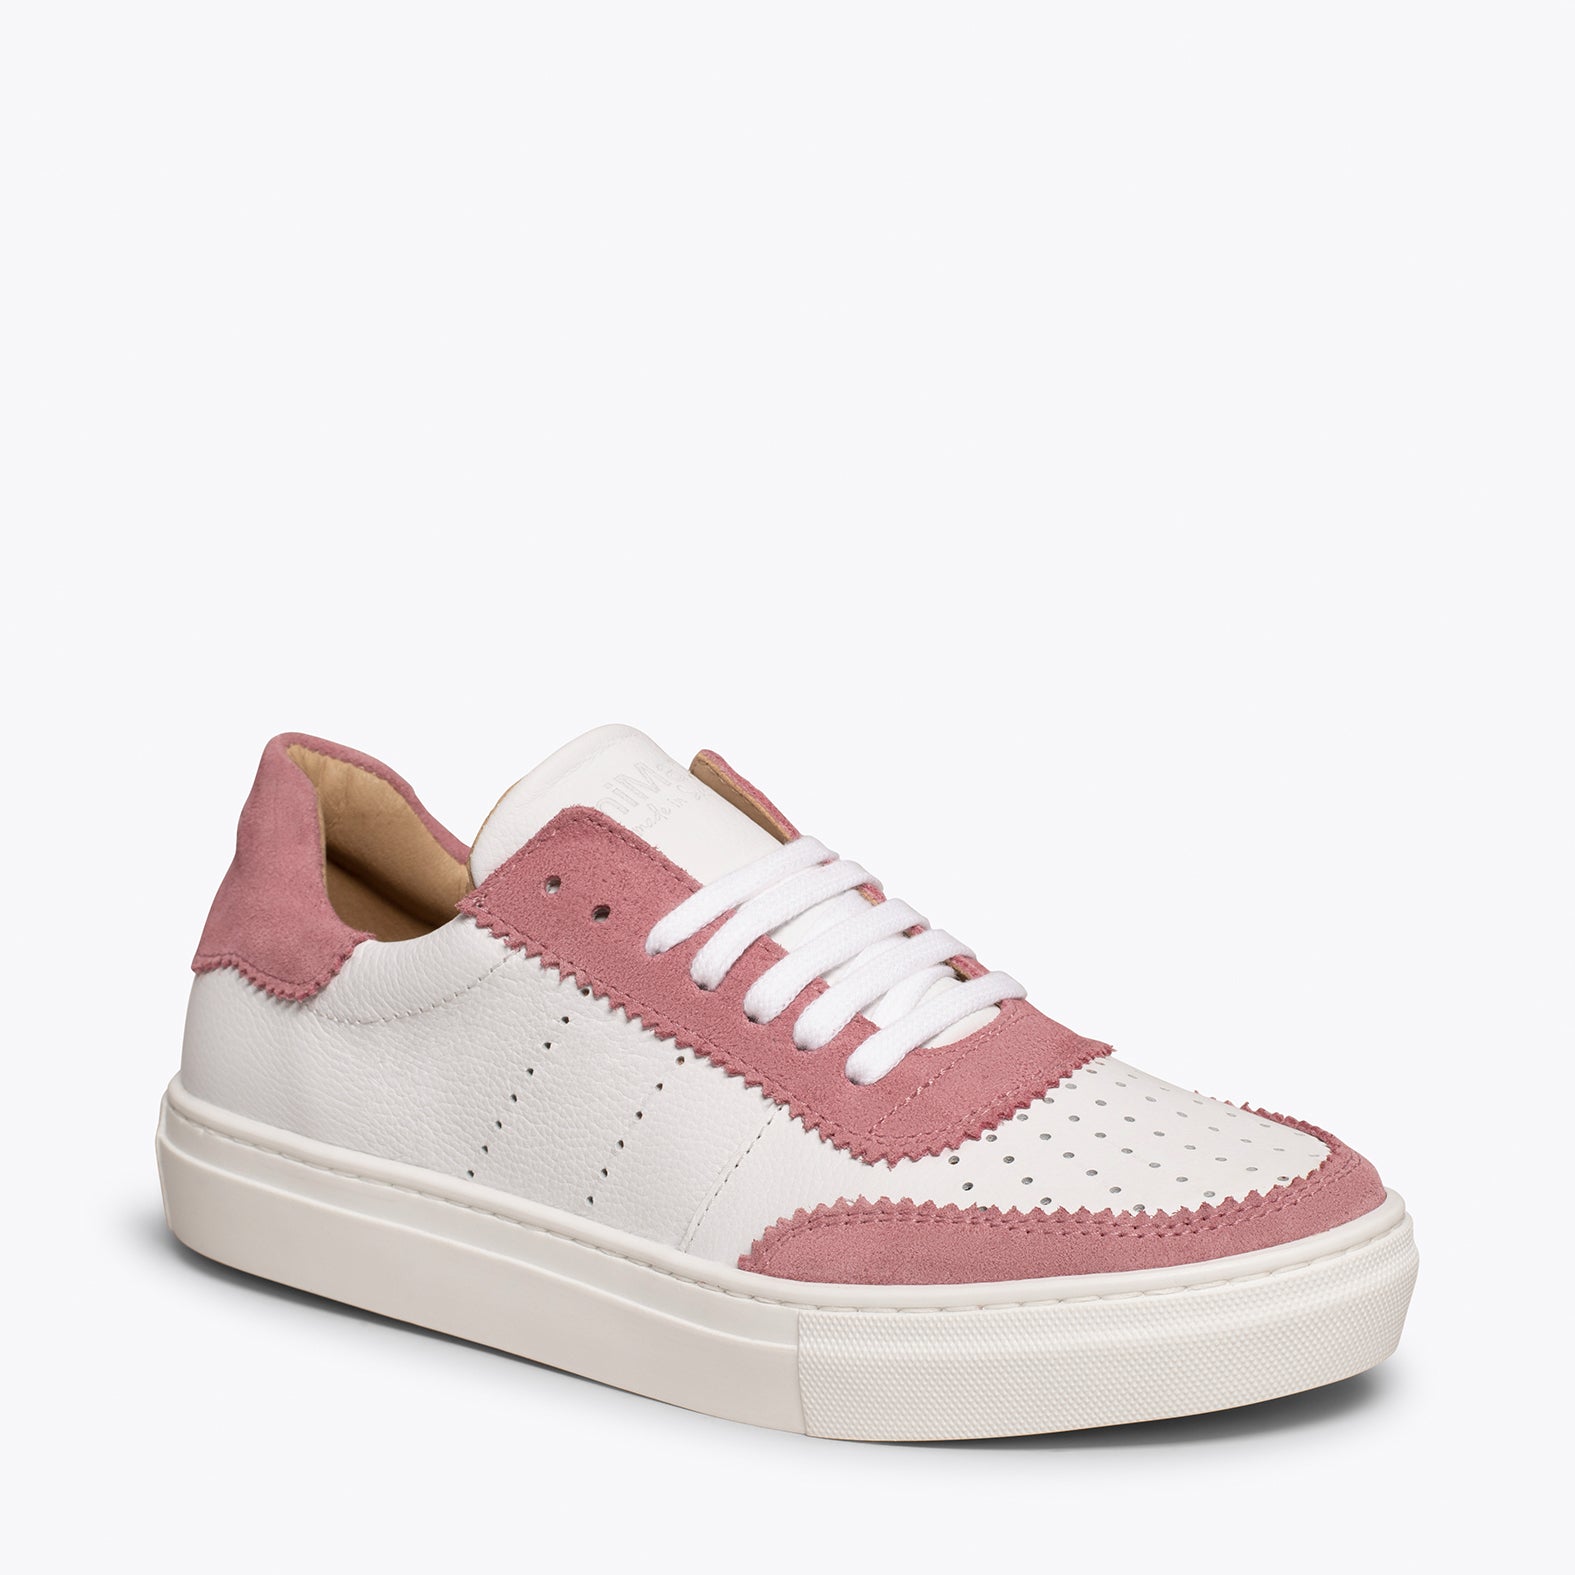 ROLLER - Sneakers pour femme blanches feston ROSE